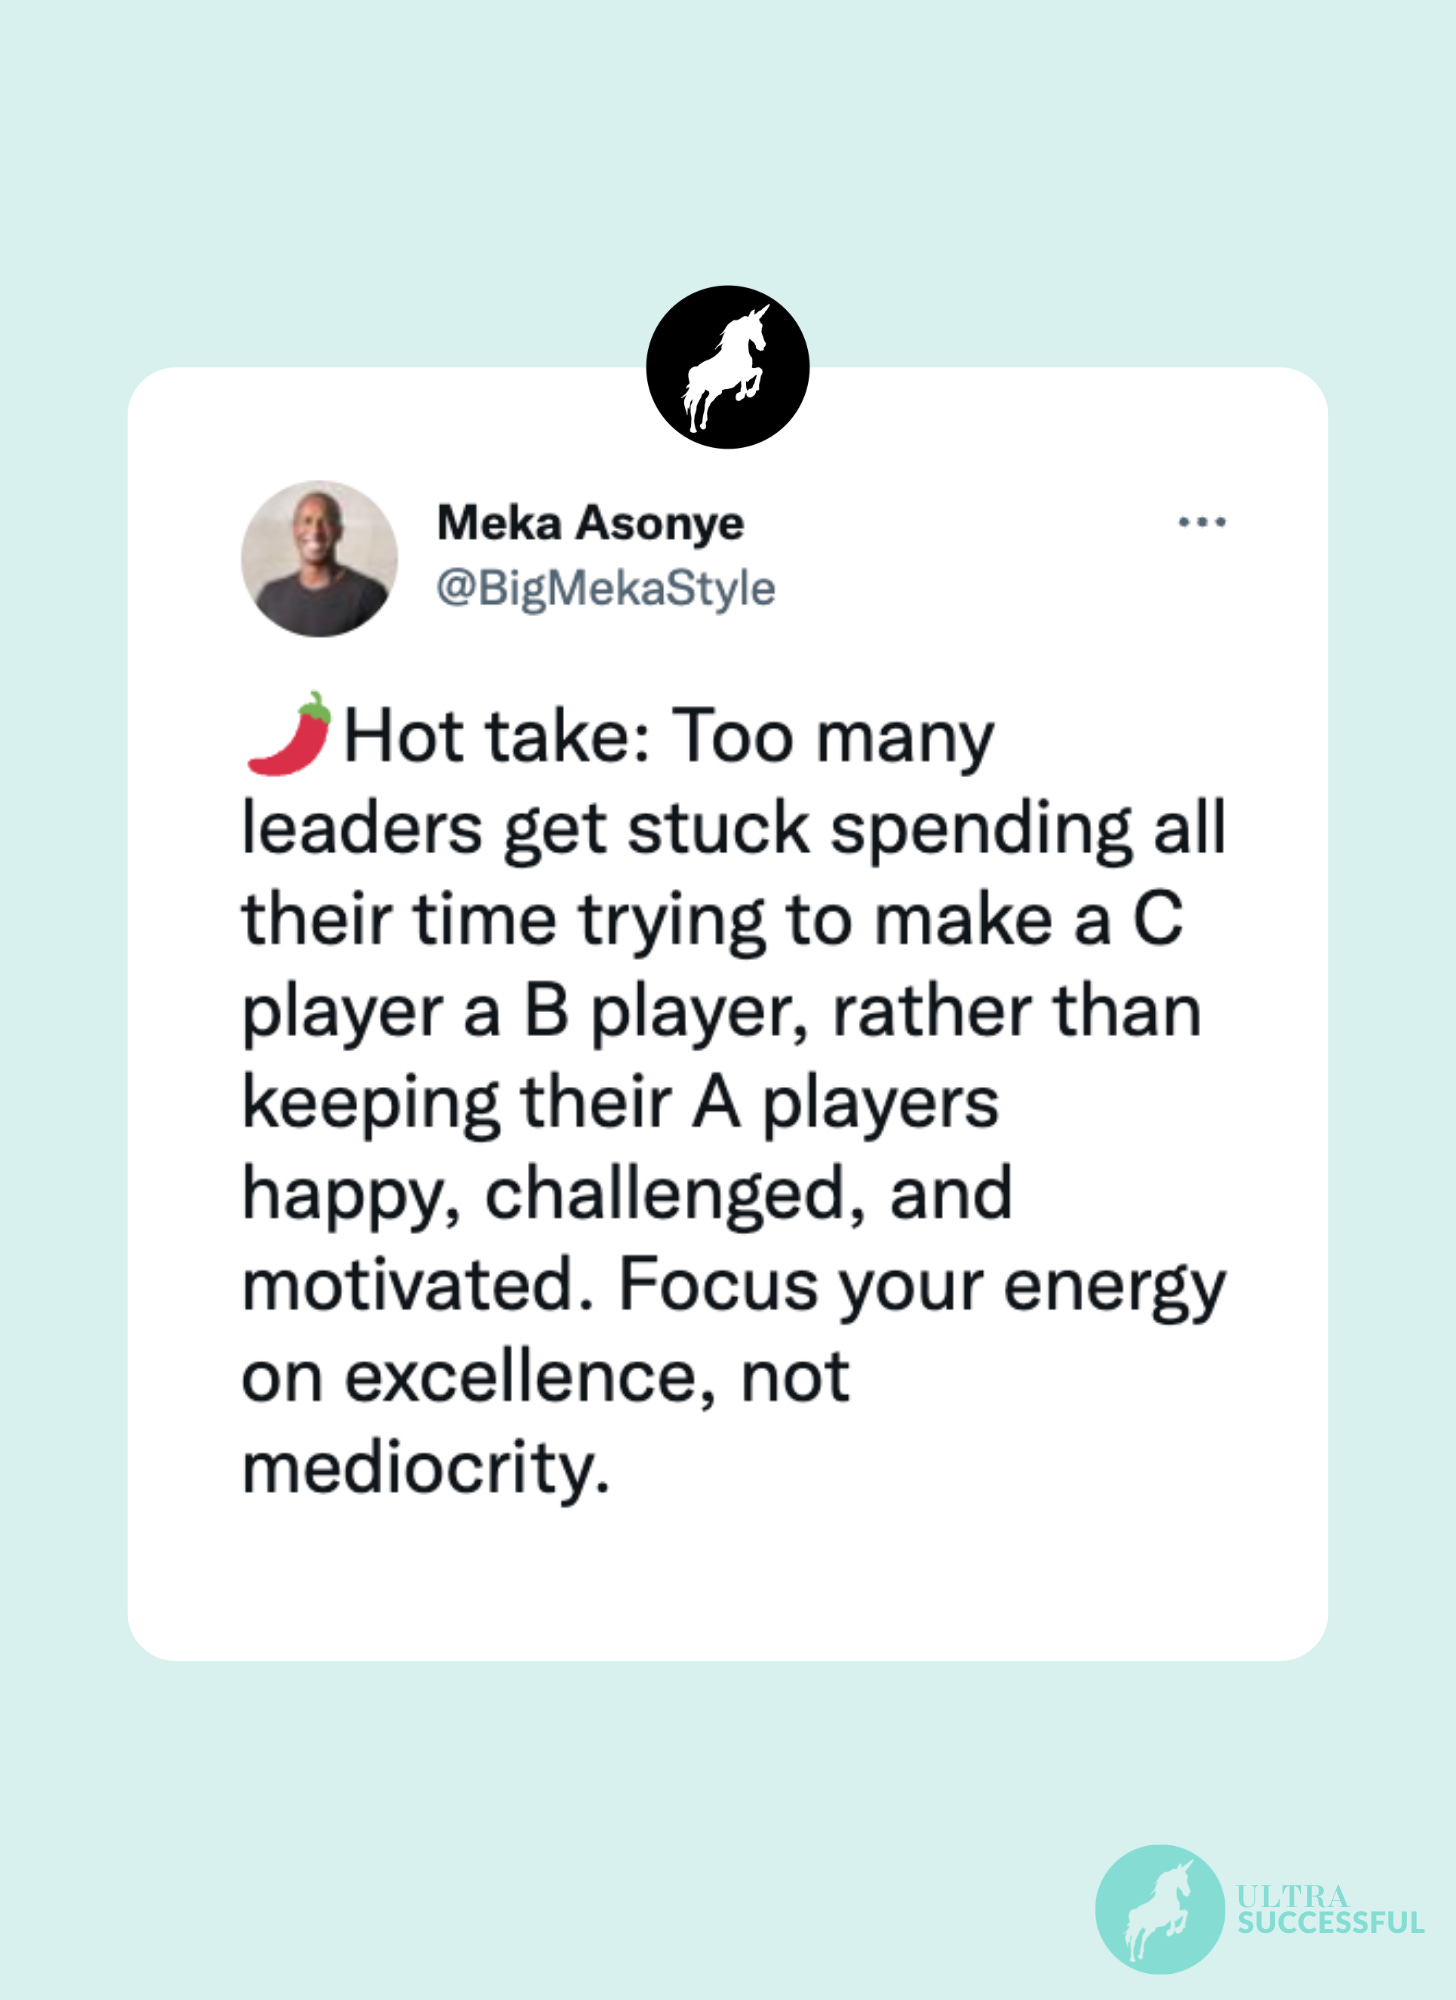 @BigMekaStyle: 🌶️Hot take: Too many leaders get stuck spending all their time trying to make a C player a B player, rather than keeping their A players happy, challenged, and motivated. Focus your energy on excellence, not mediocrity.